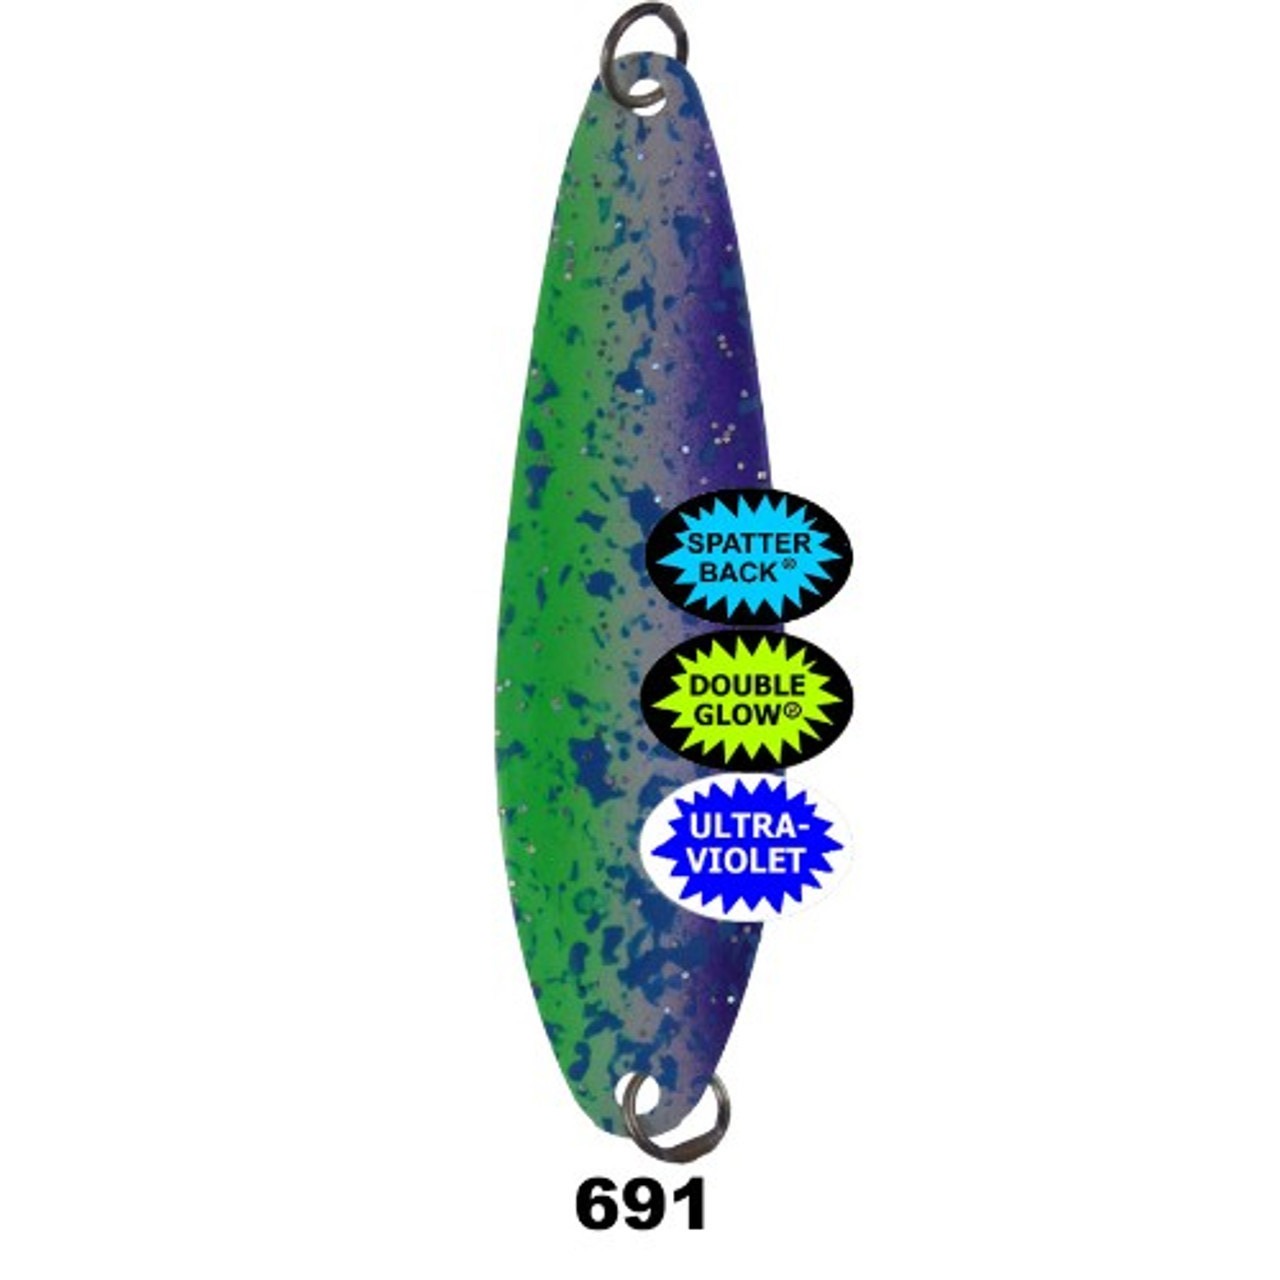 Salmon Lures: What Colour and When? - Island Fisherman Magazine